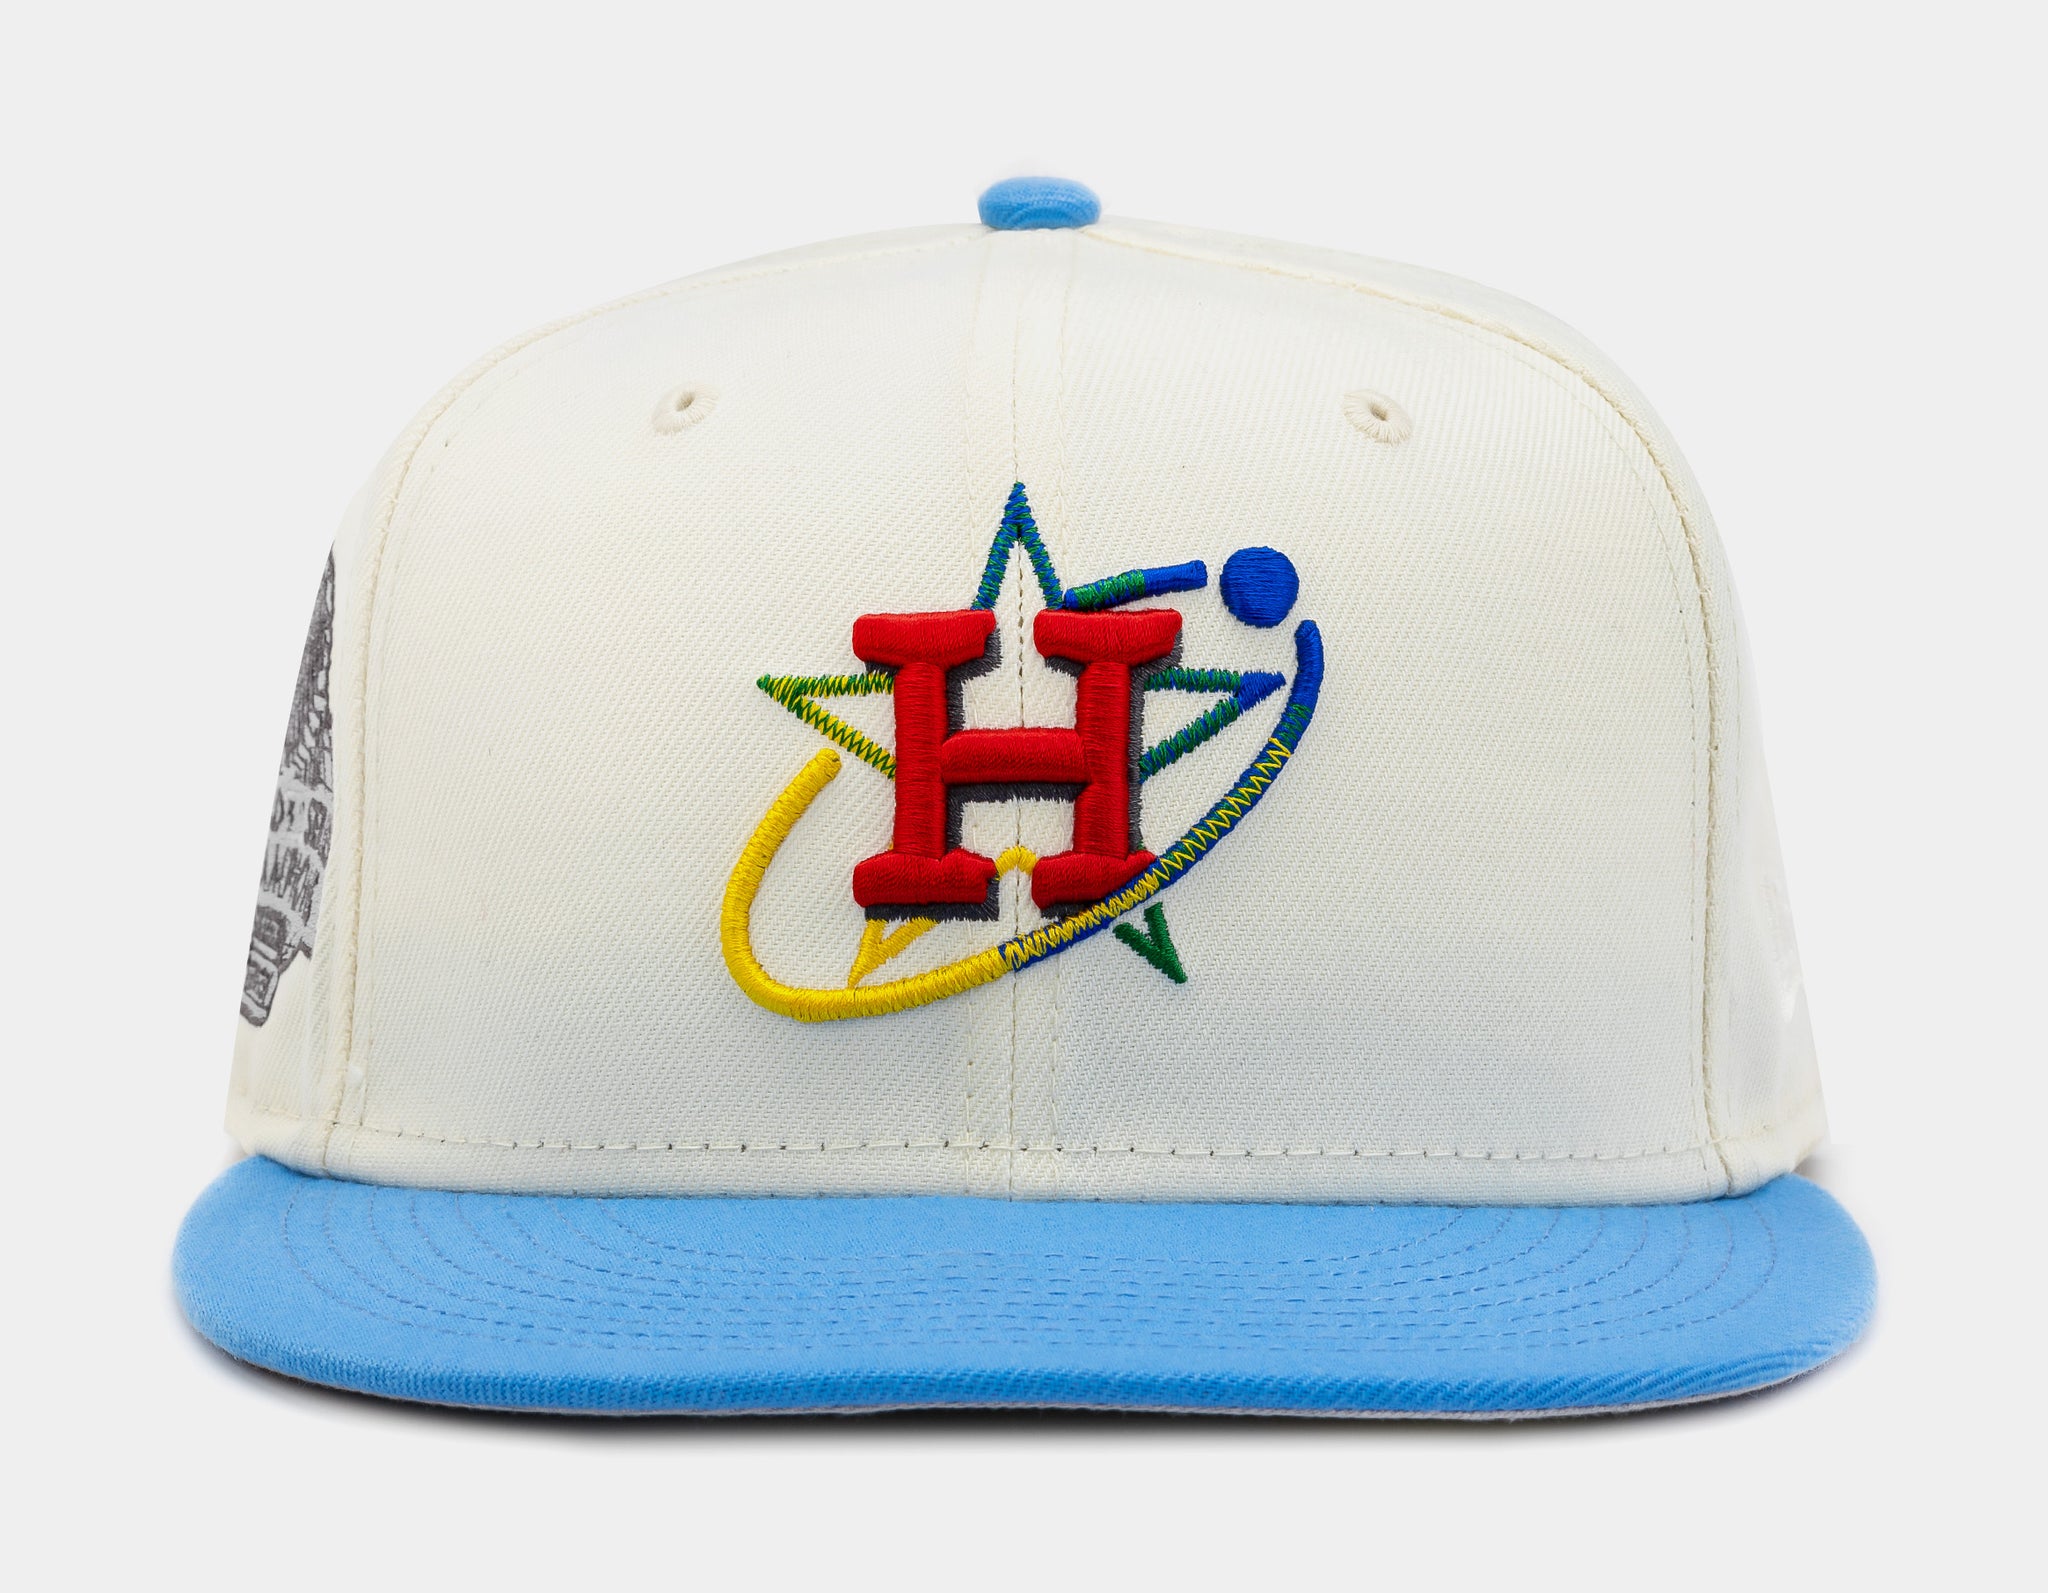 Men's New Era Light Blue Houston Astros 59FIFTY Fitted Hat